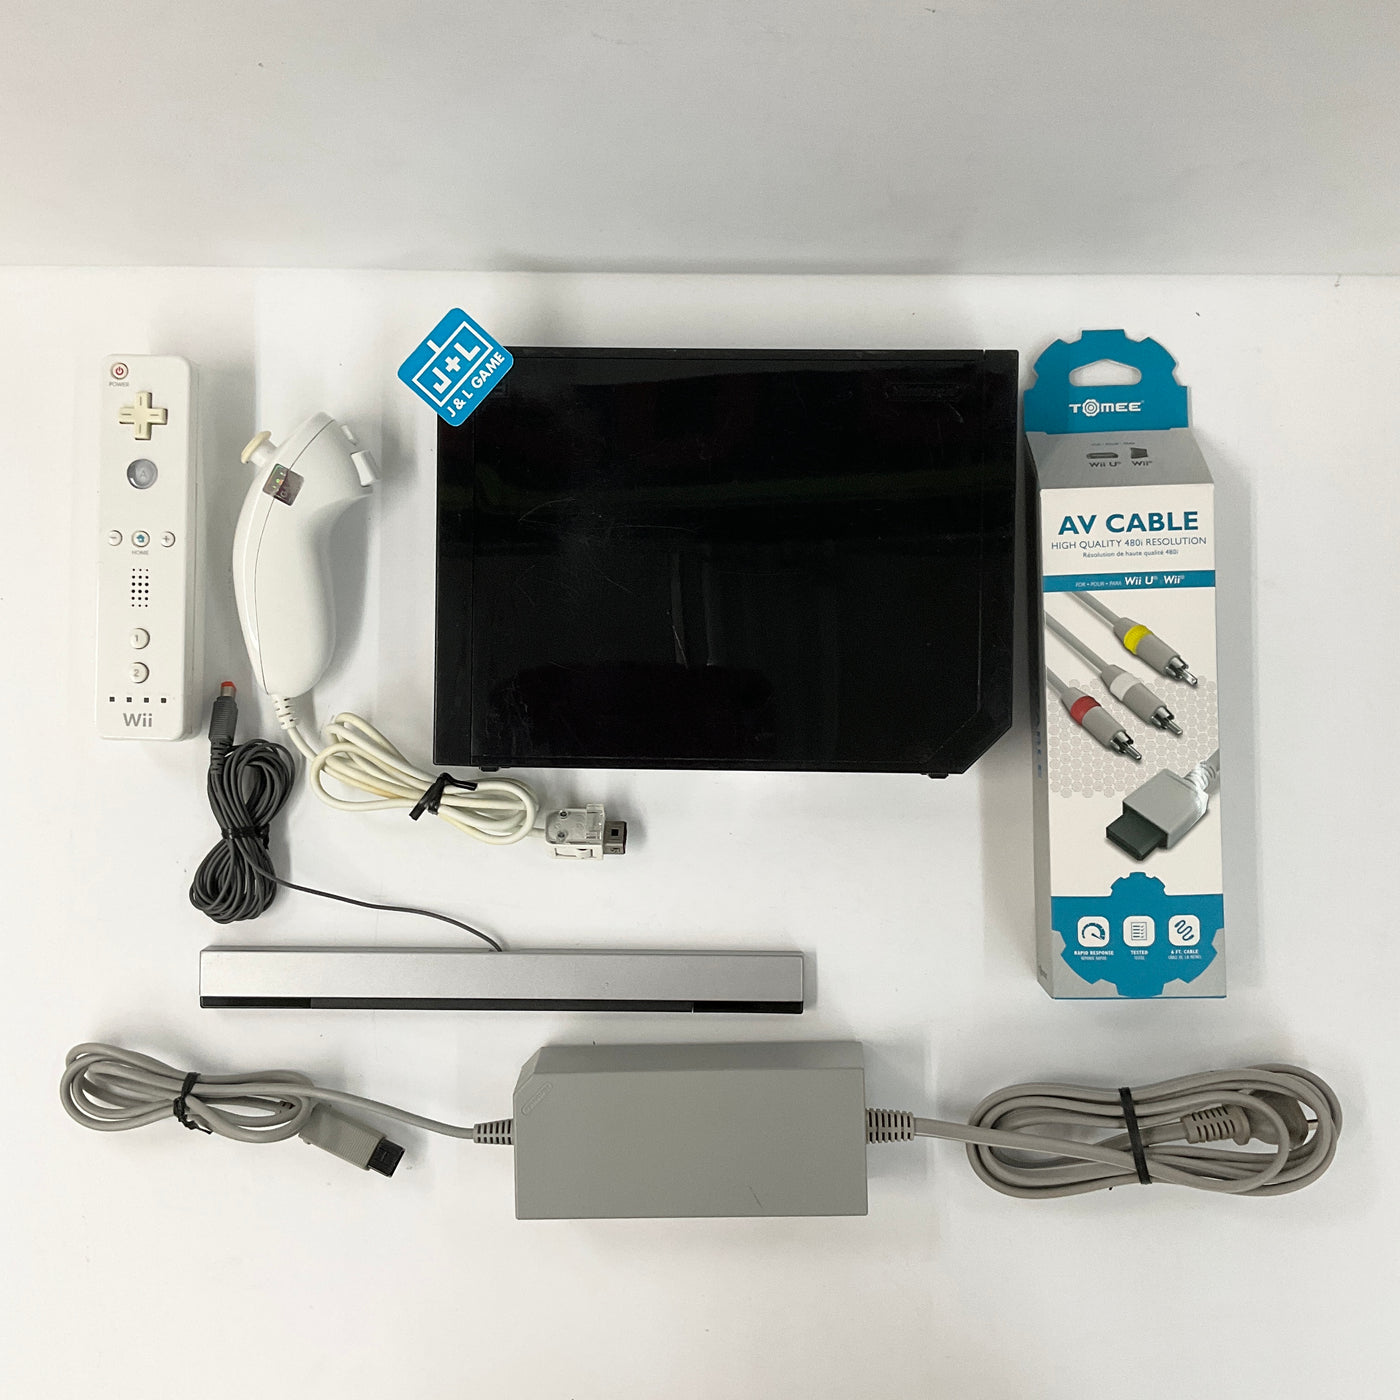 Nintendo Wii Console (Black) - Nintendo Wii [Pre-Owned]